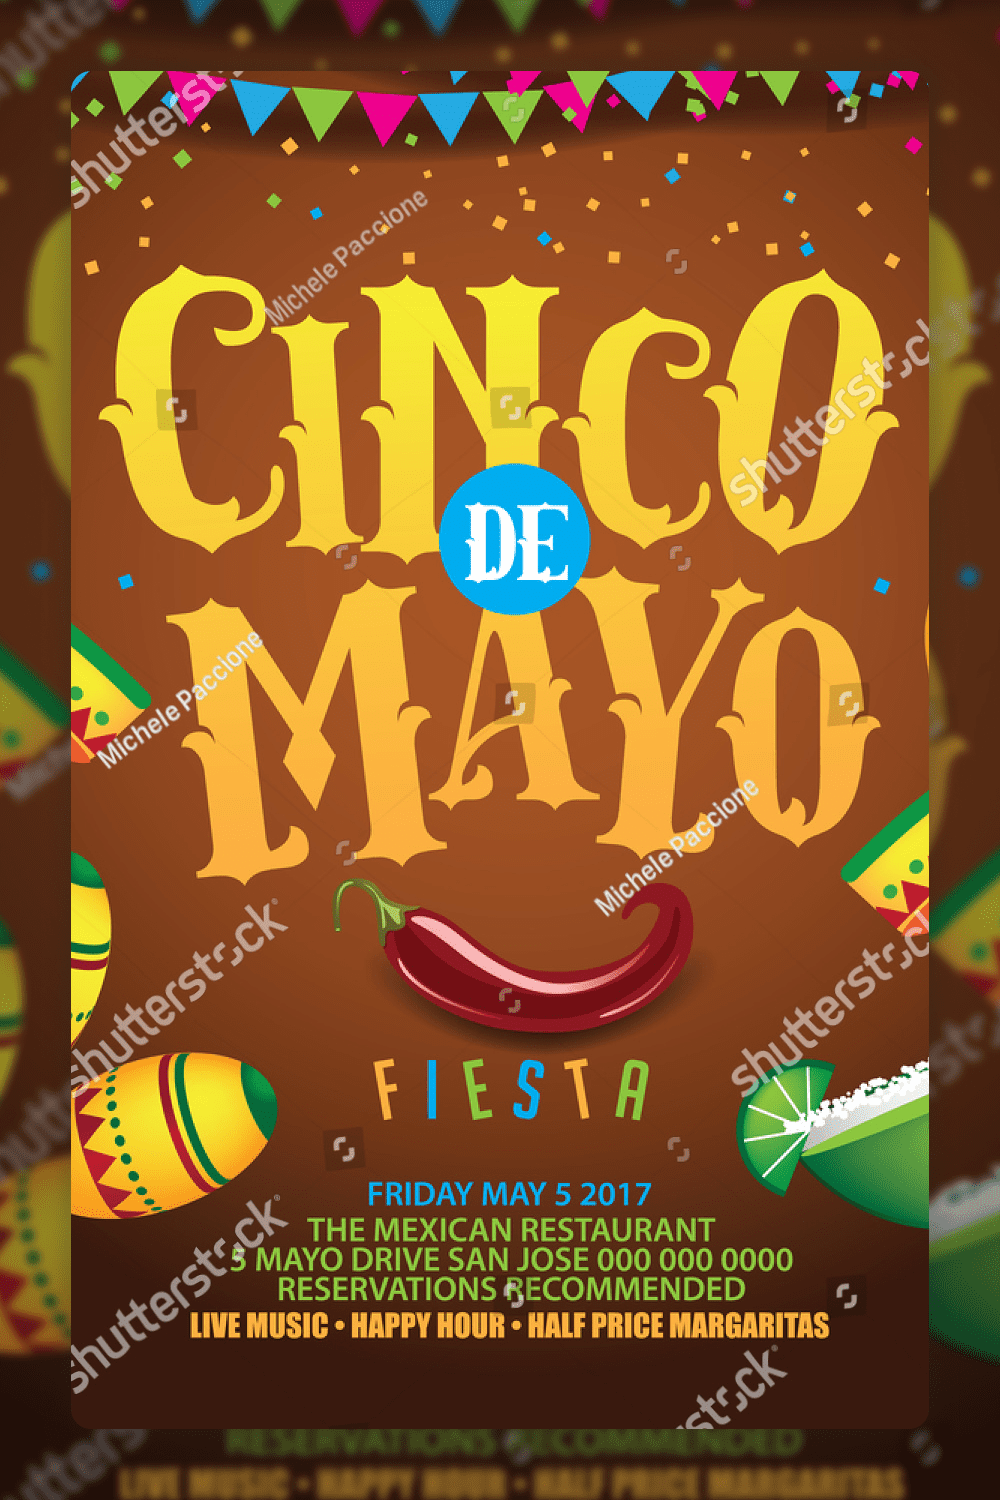 Cinco De Mayo poster or marketing design for celebration of the Mexican holiday.